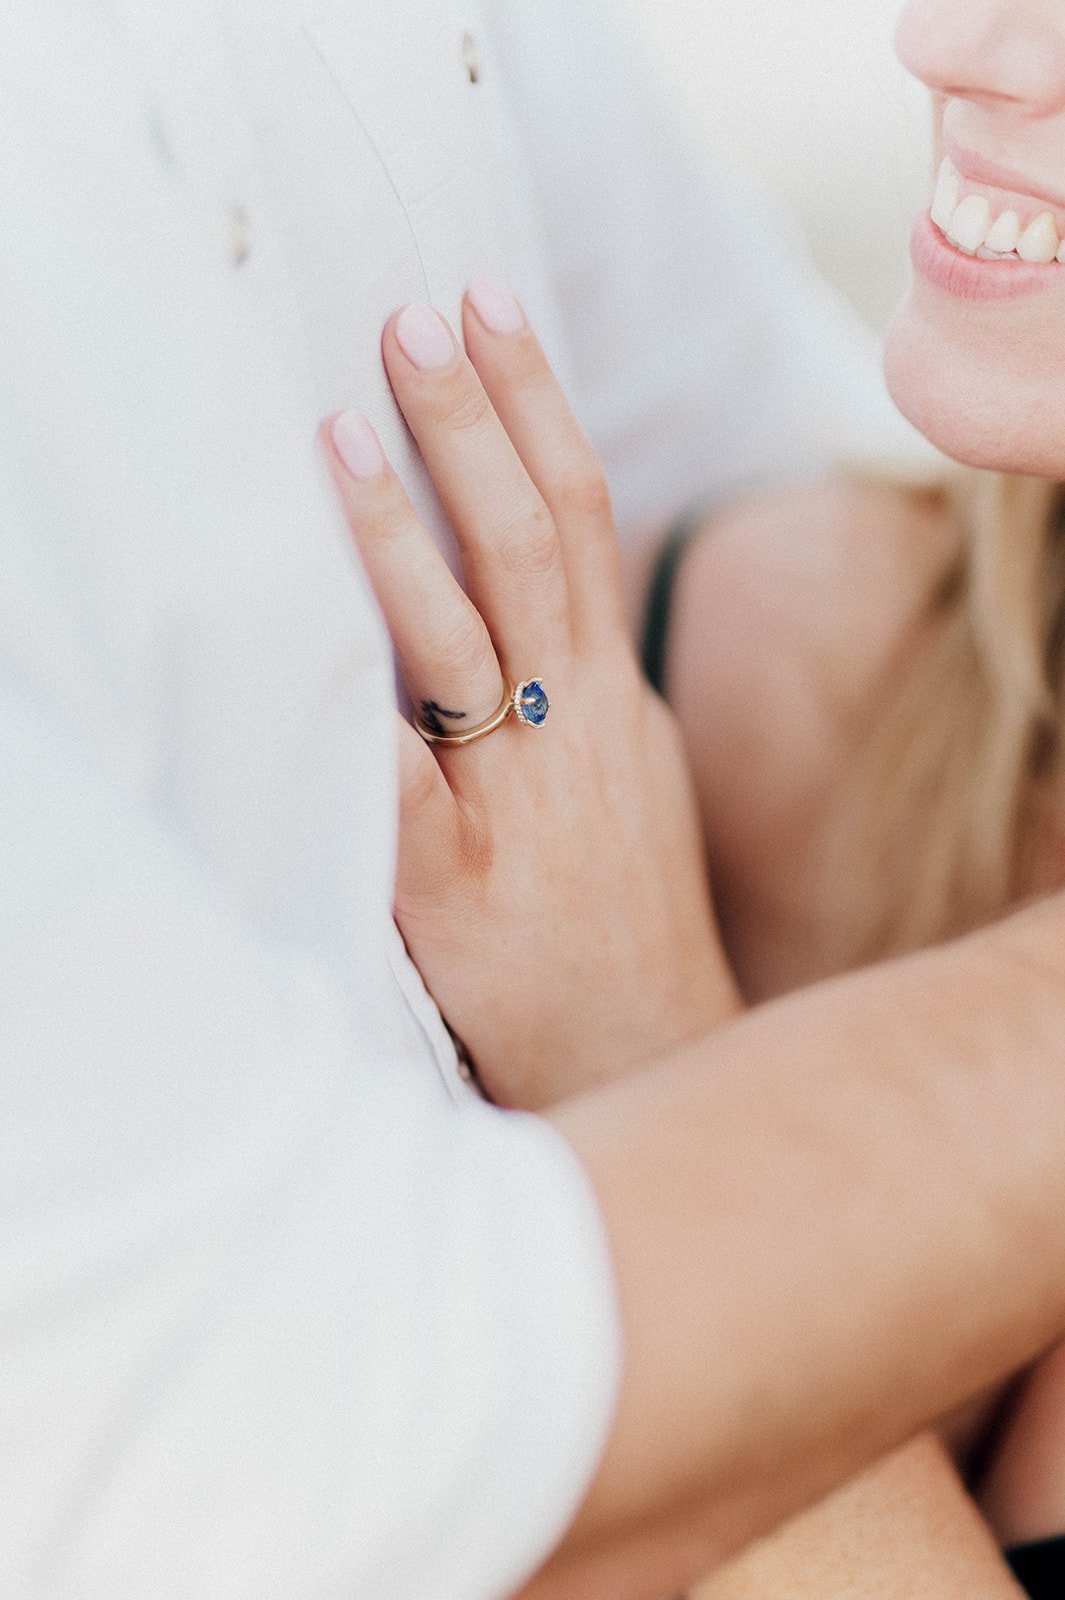 A sapphire ring shines on a brides hand as she smiles at her groom.